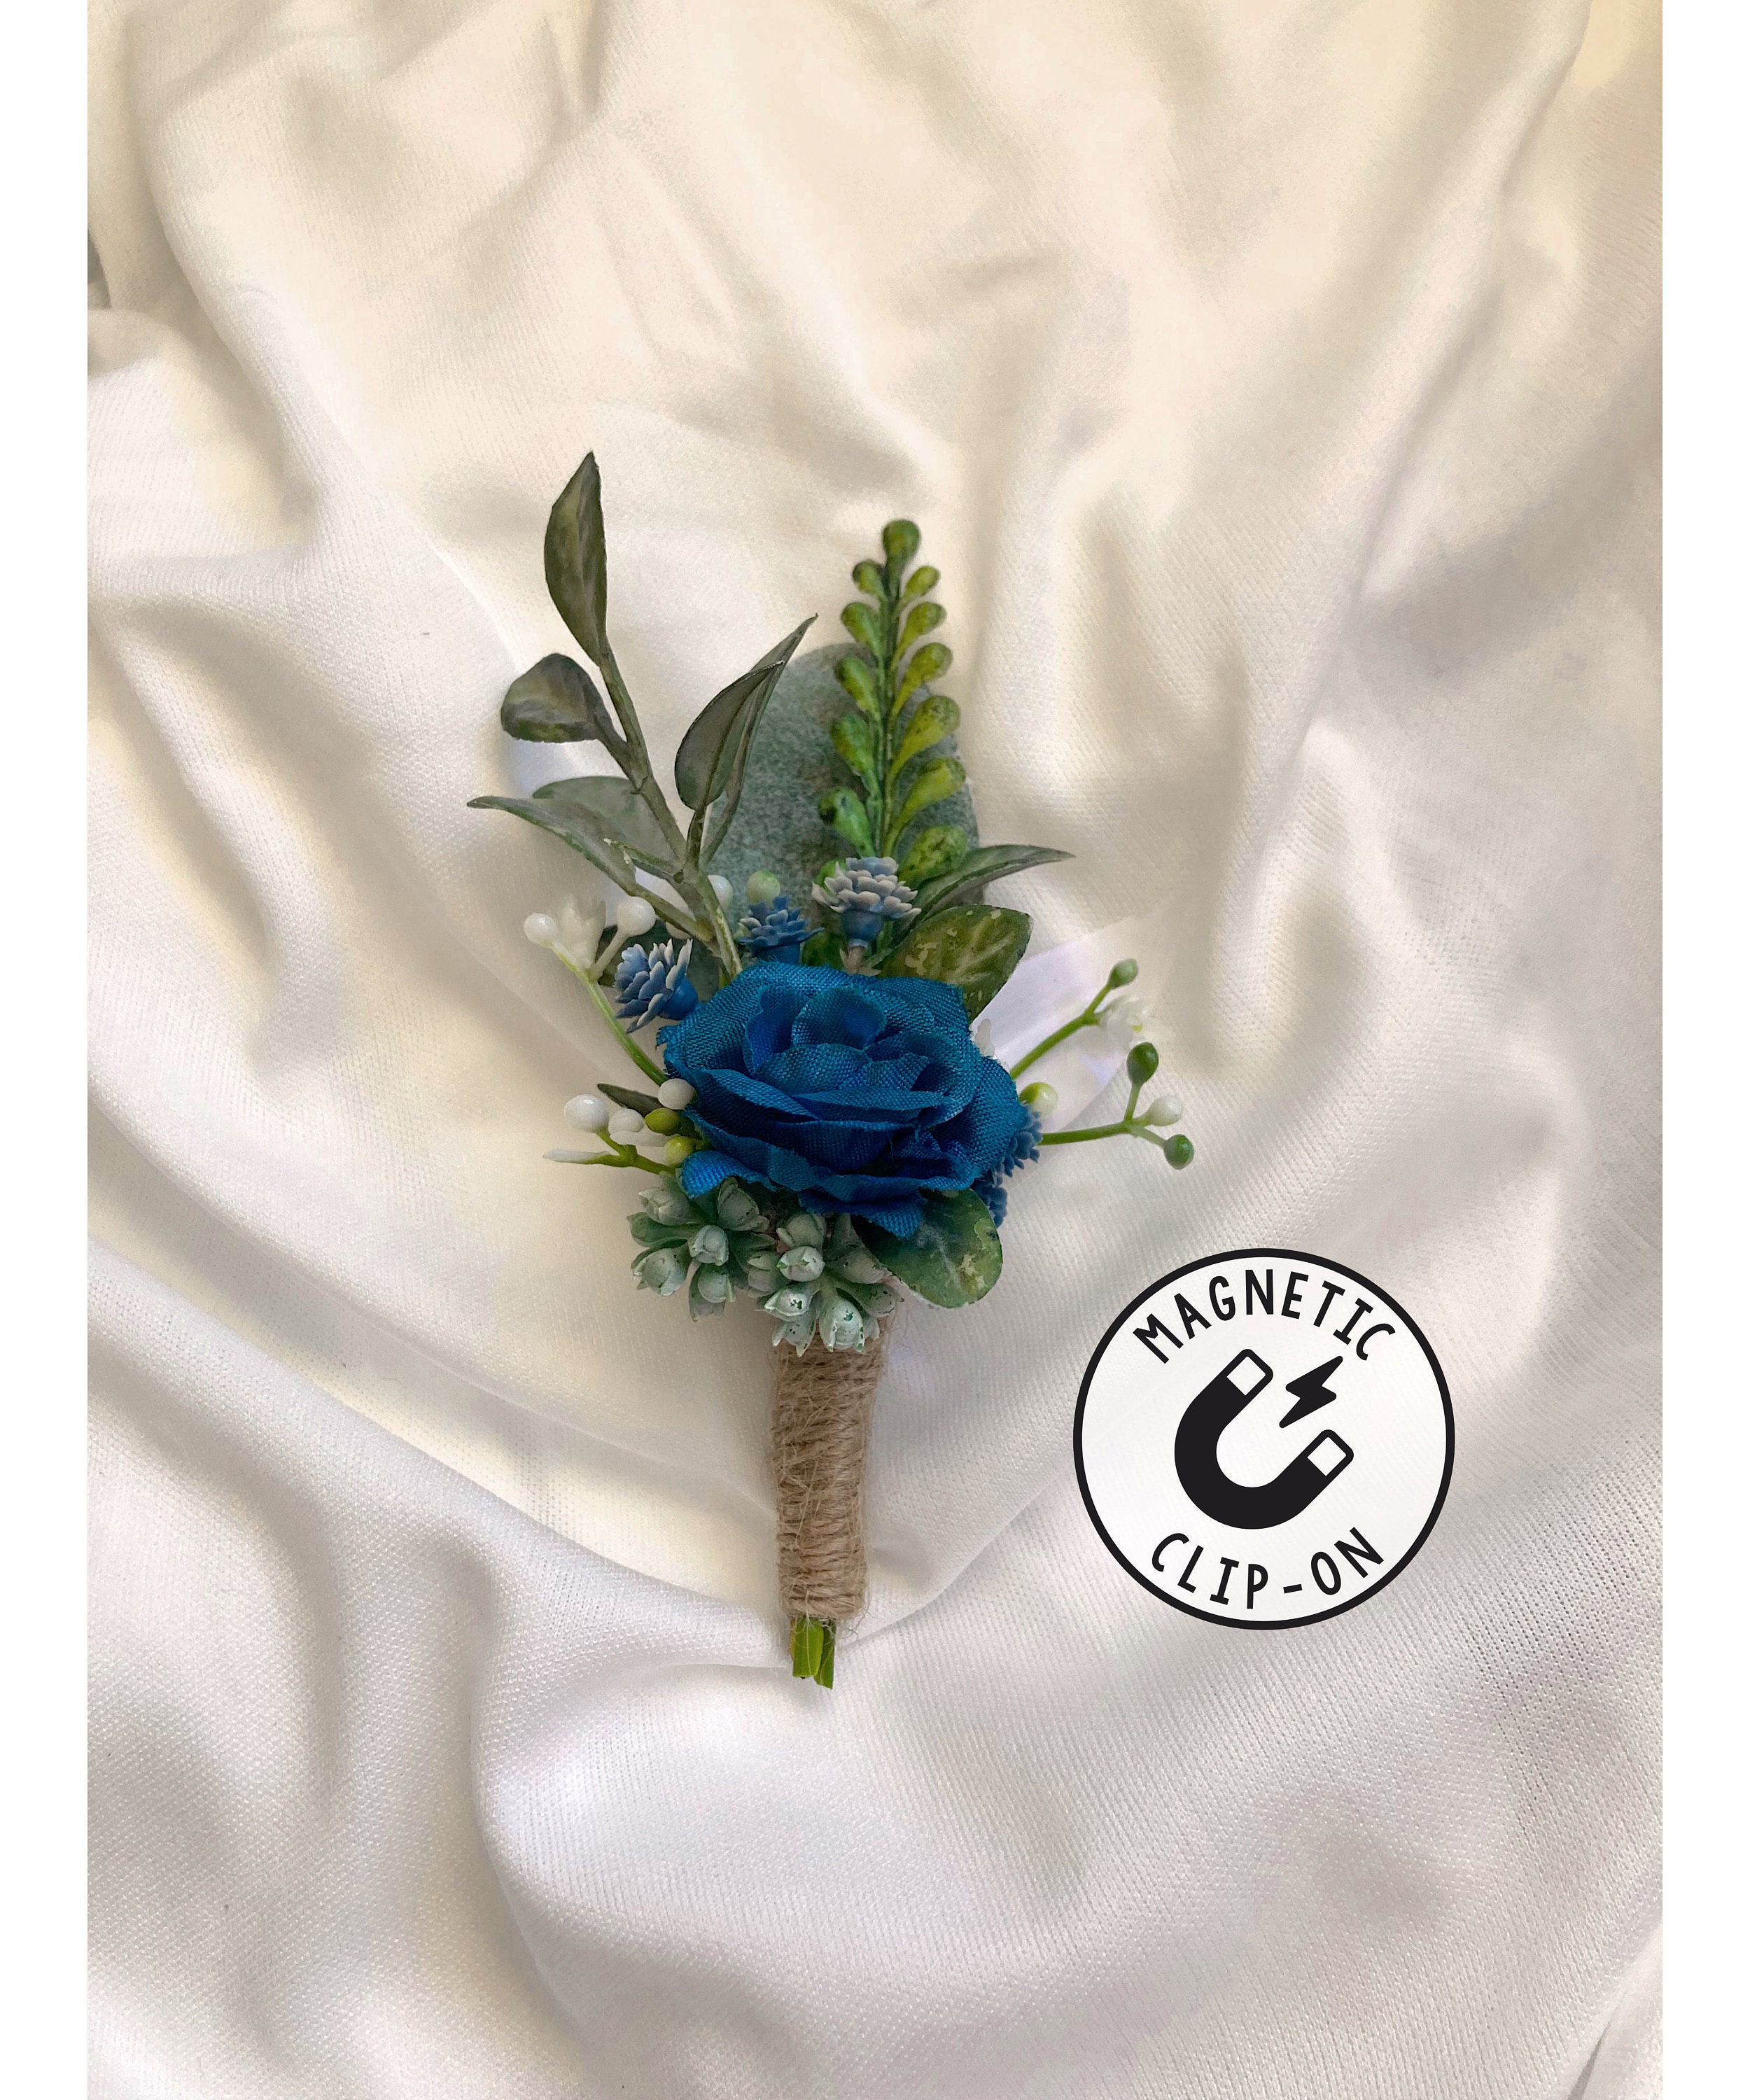 Champagne and Navy Blue Roses With Silver Dollar Eucalyptus Rustic Chic  Wedding Bouquet, Corsage, Boutonniere Flower Crown 